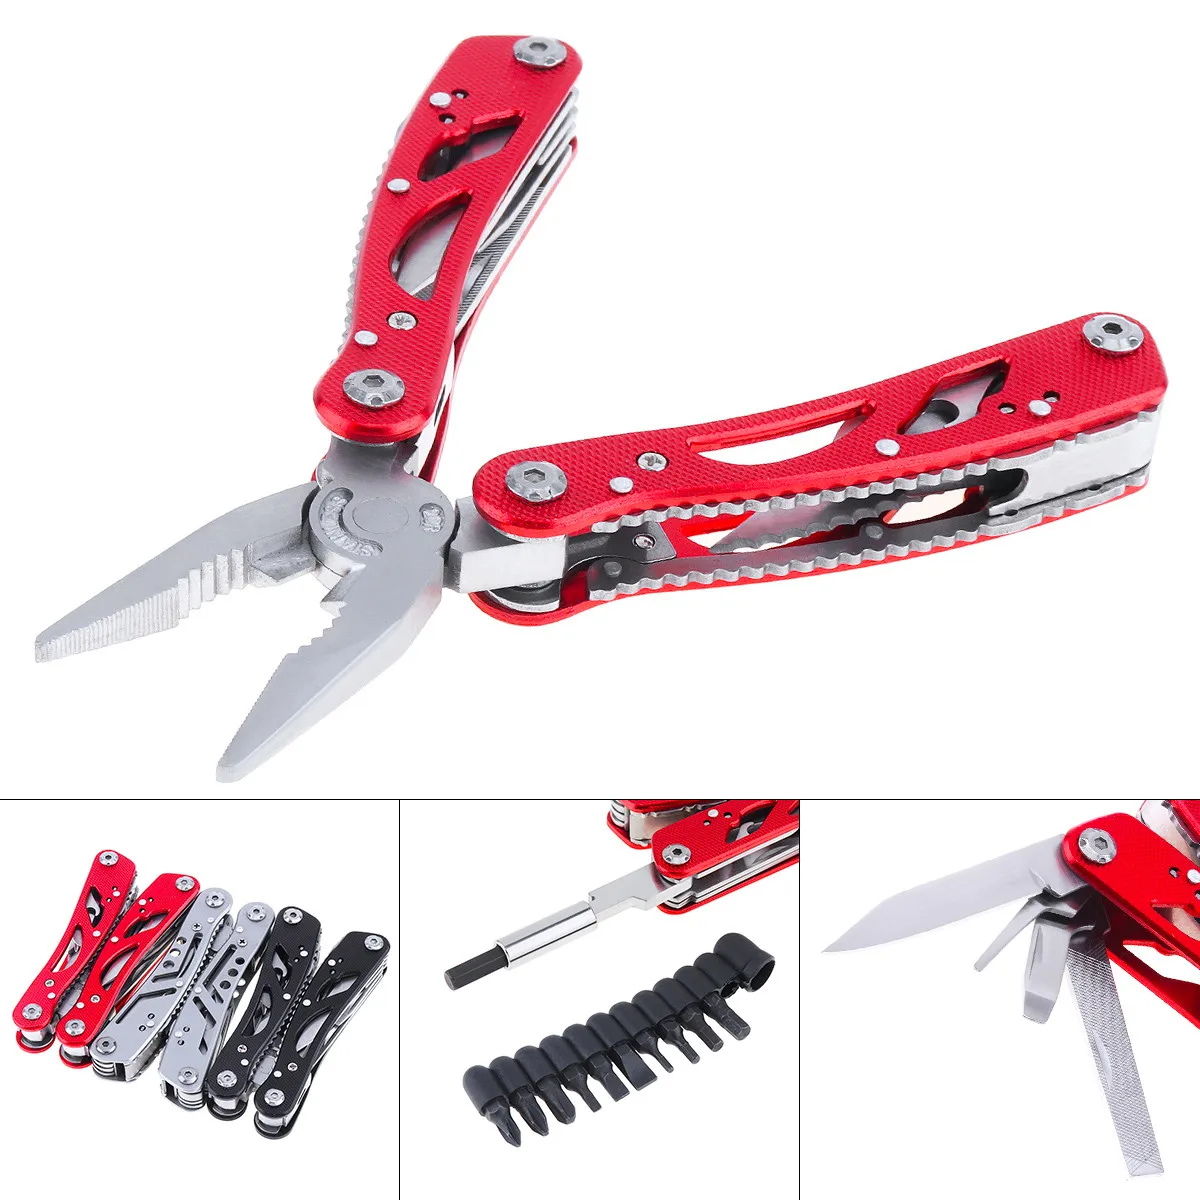 

Multifunction Built-in Spring Folding Mini Pliers Slotted Phillips Screwdriver Bottle Opener Combination Tool Set for Camping